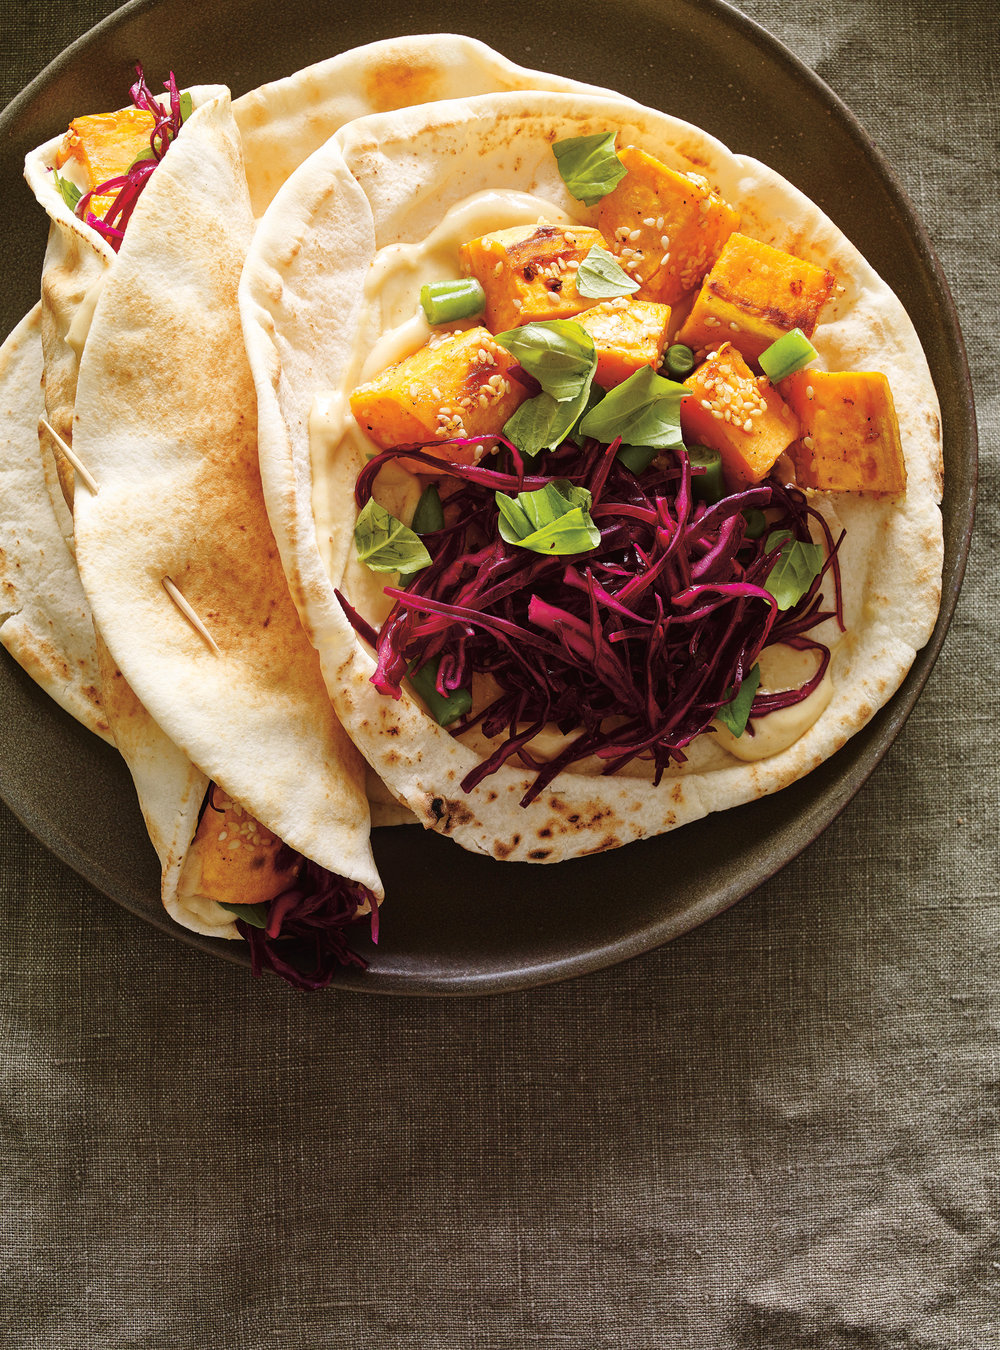 Parmesan Crusted Sweet Potato, Red Cabbage and Sesame Pita Sandwiches